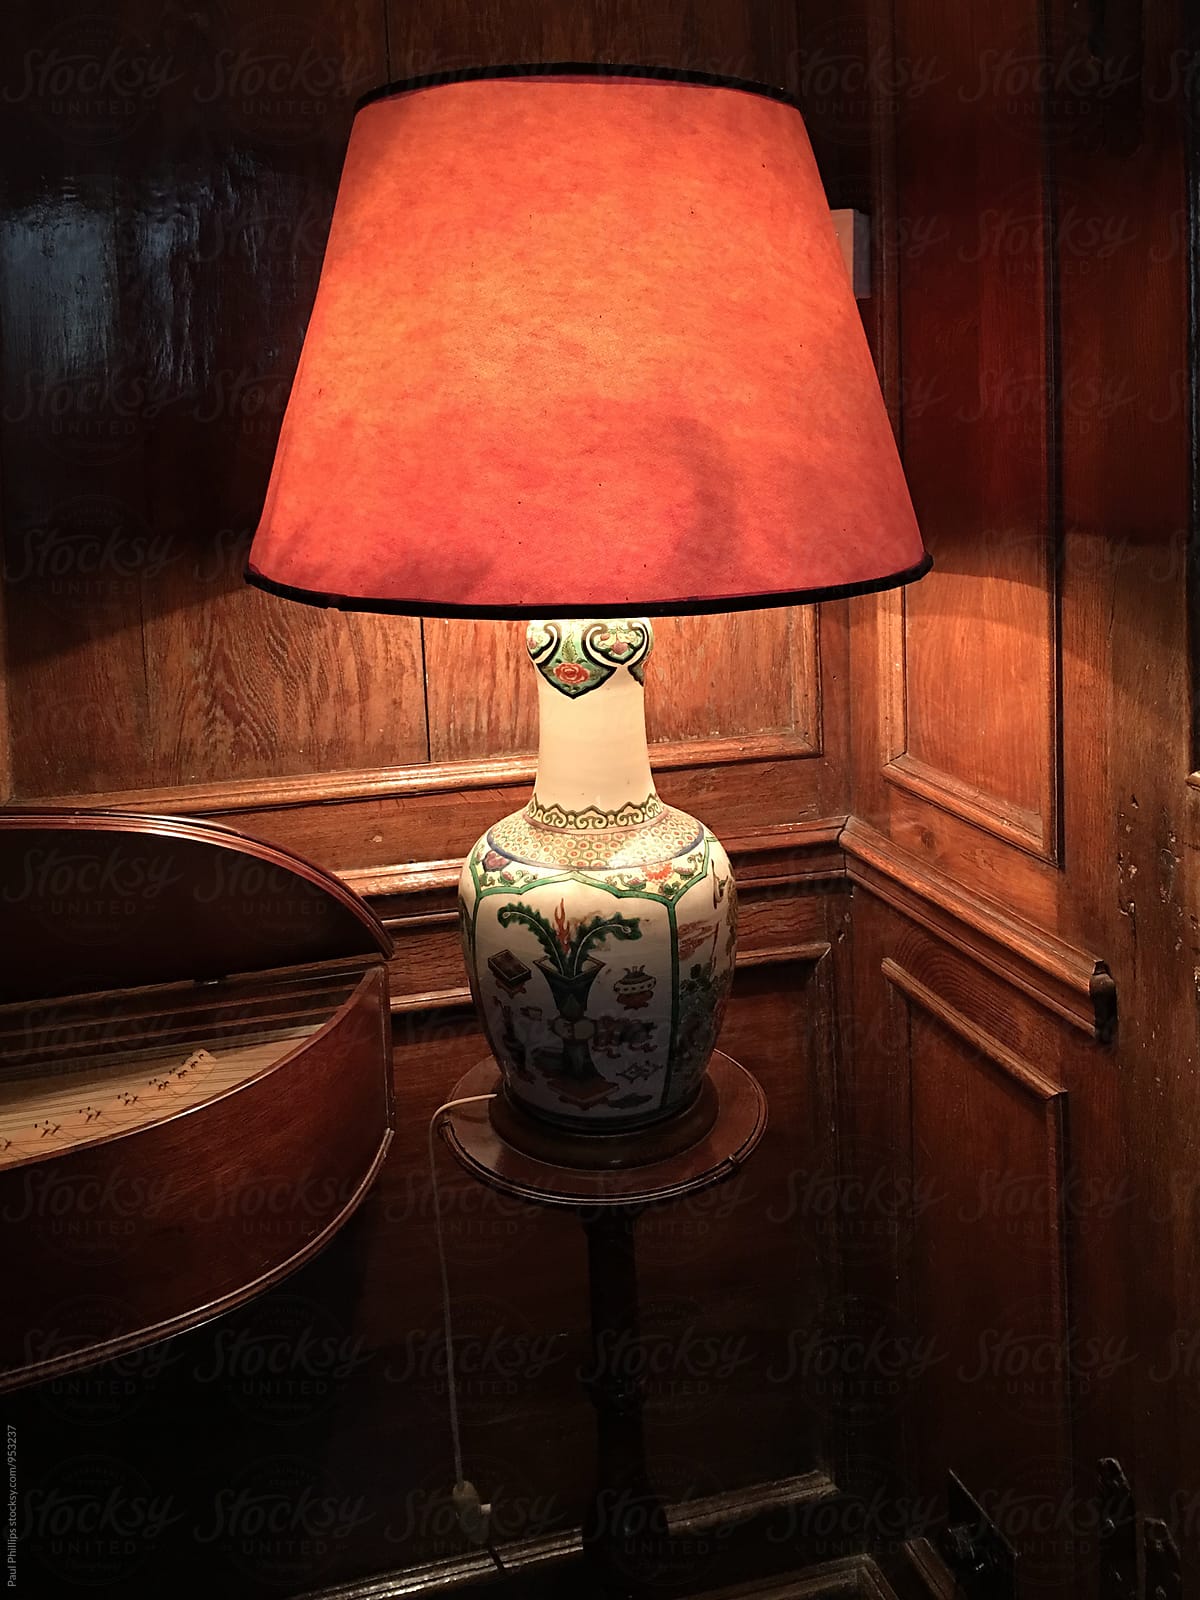 Table lamp standing in the corner of a period room.